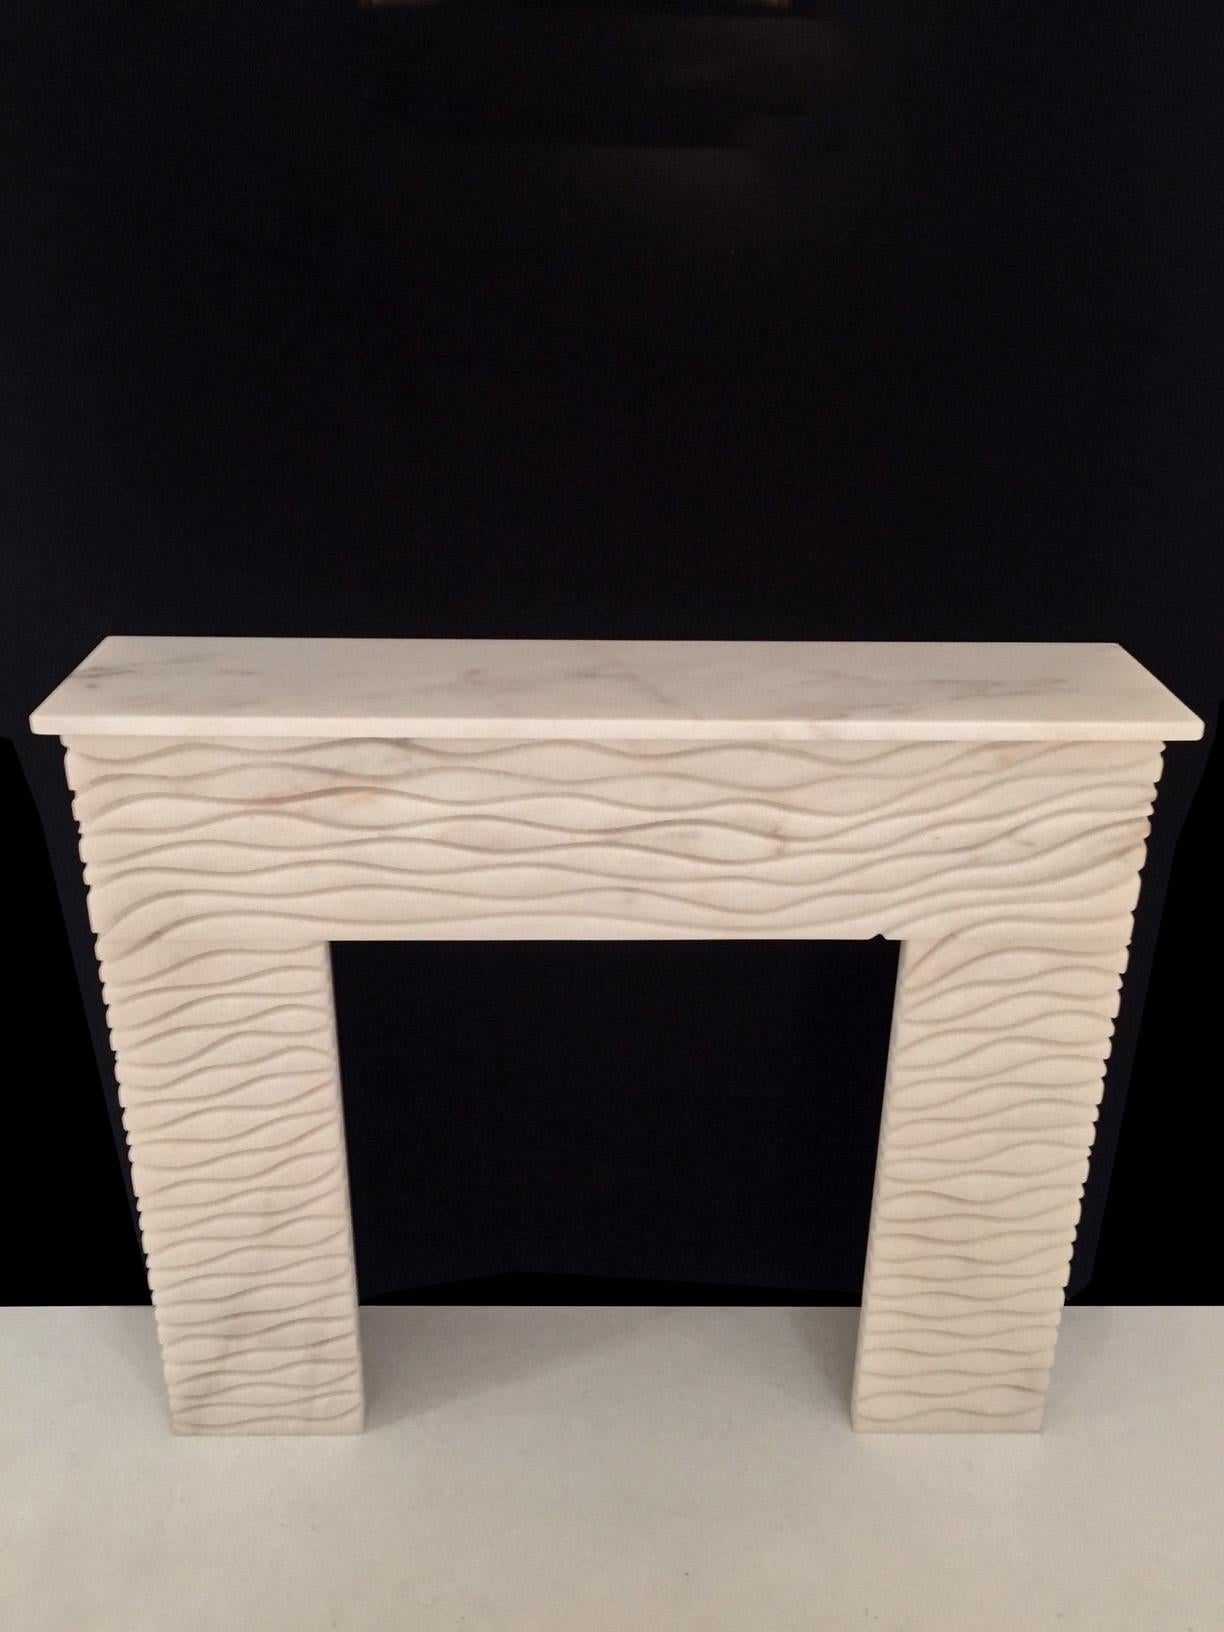 Fluid Fire fireplace by Jean-Fréderic Bourdier
Dimensions: D 20 x W 119 x H 102 cm
Materials: White Estremoz marble.

Mostly guided by his sculptor skills JFB and his life time strong attraction for nature, has started out this collection in